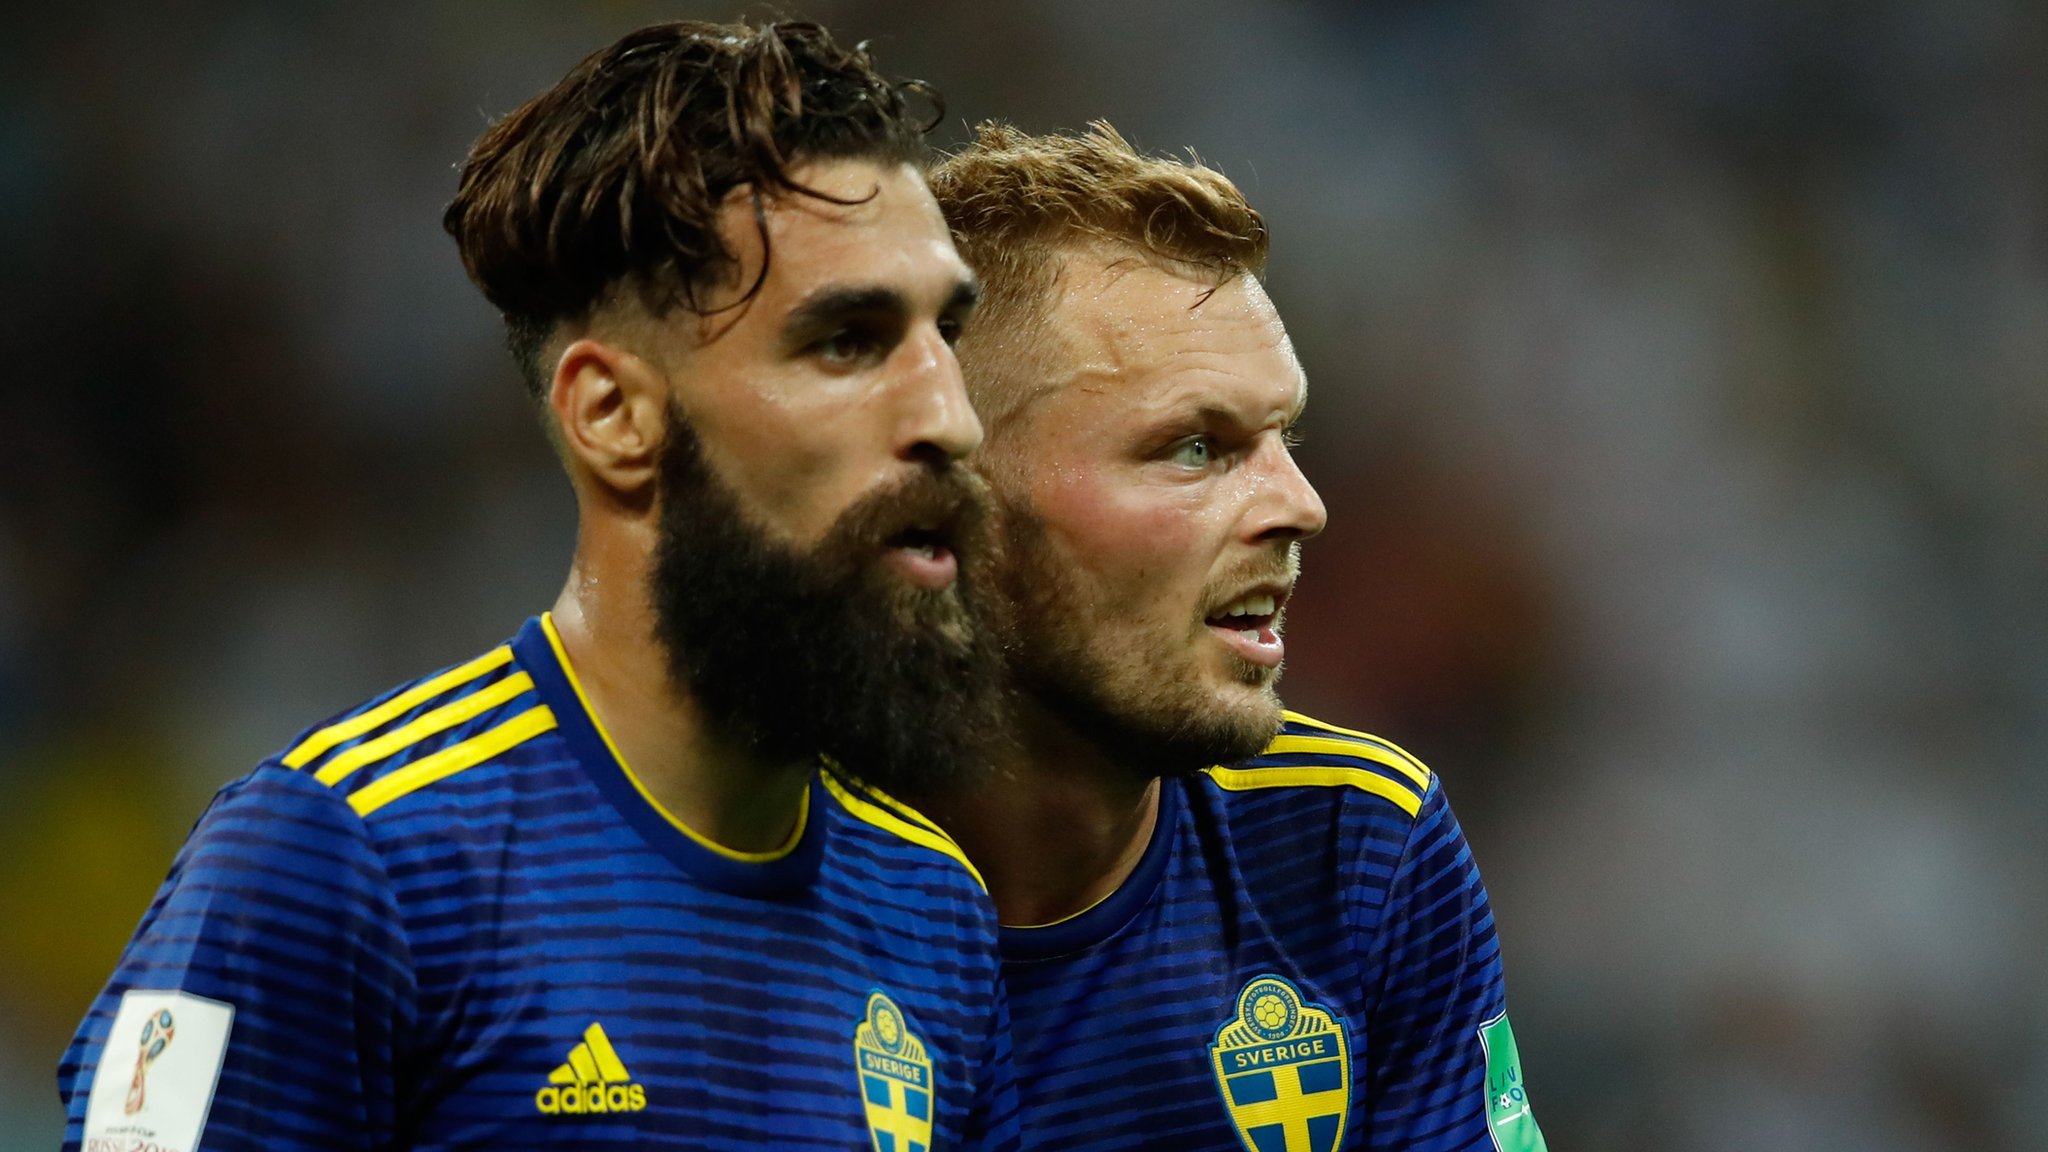 World Cup 2018: Sweden's Jimmy Durmaz defended by team-mates after racial abuse